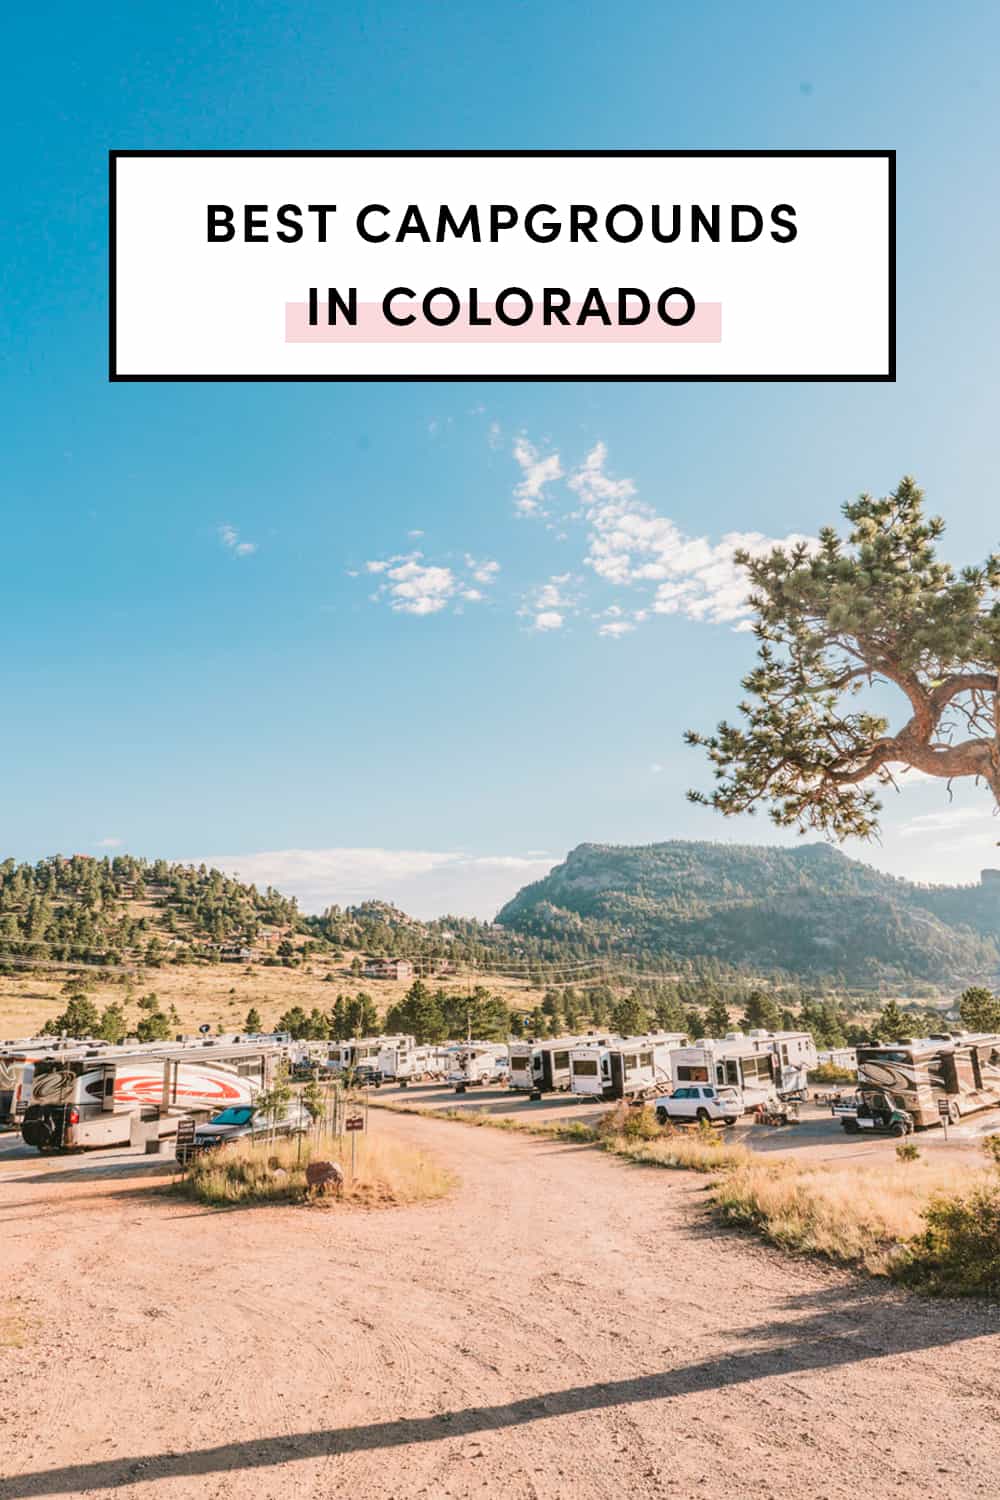 Best campgrounds in Colorado